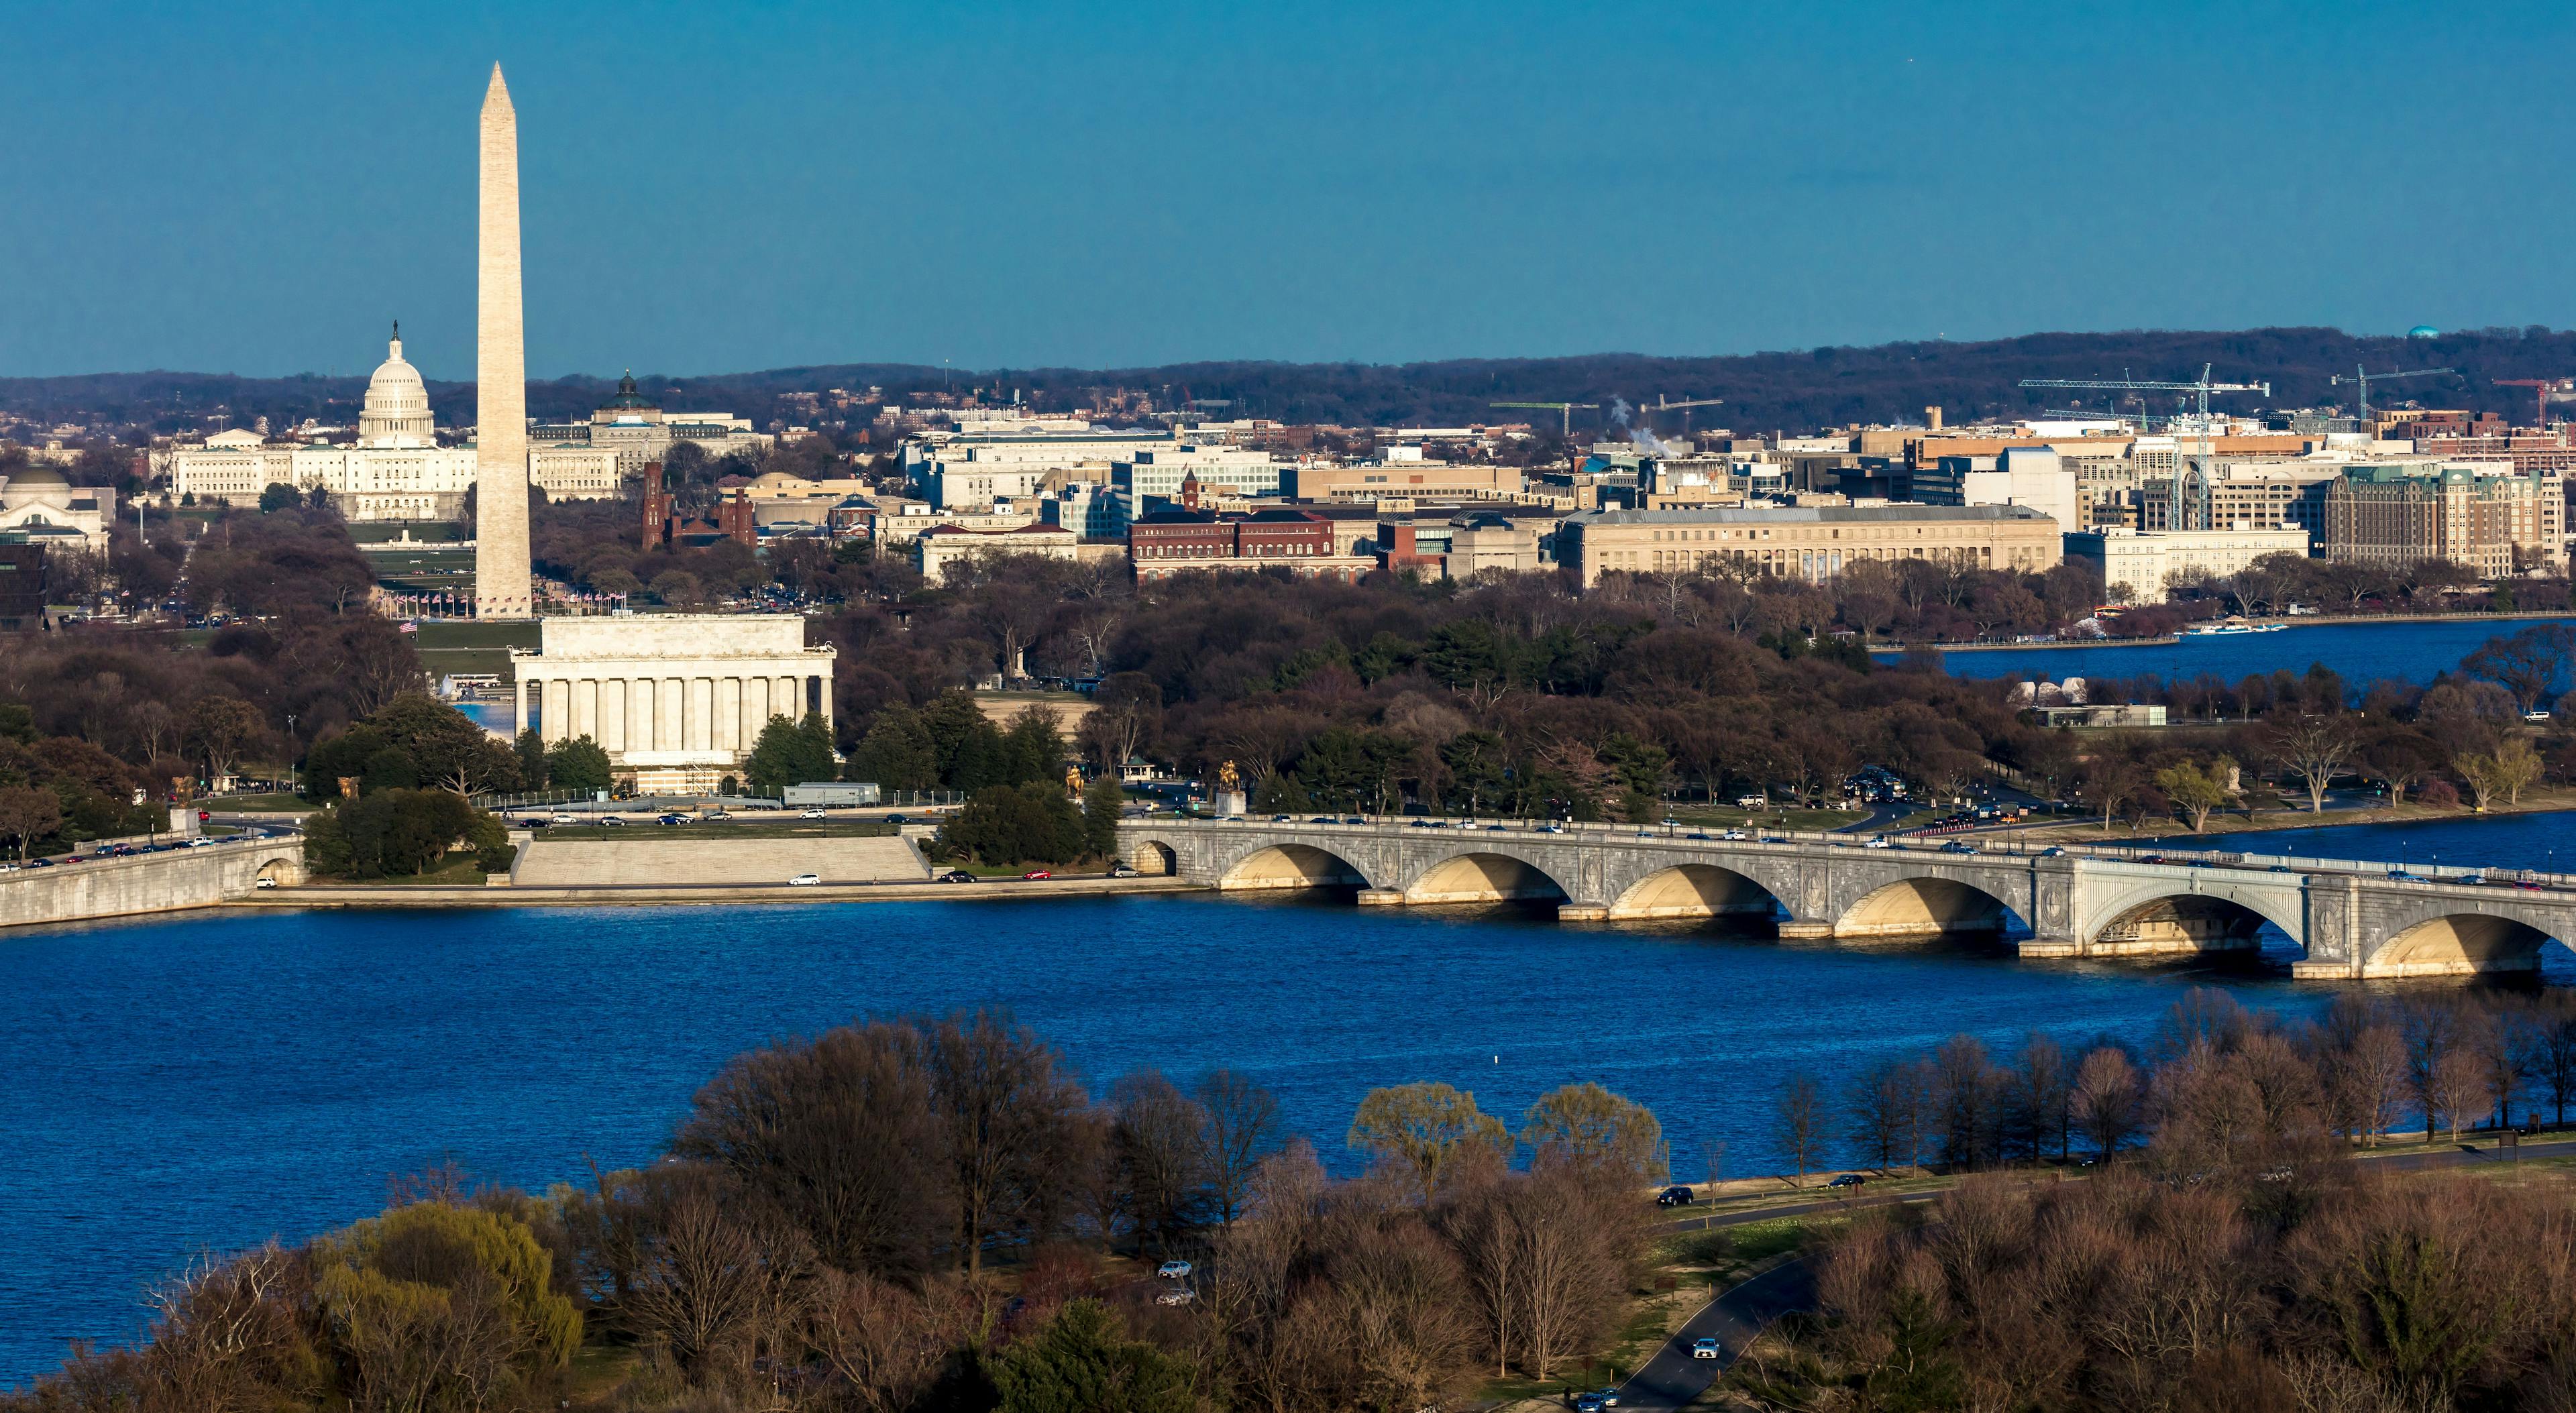 Credit: Spirit of America/Adobe Stock

A view of Washington, District of Columbia, from Arlington, Virginia.